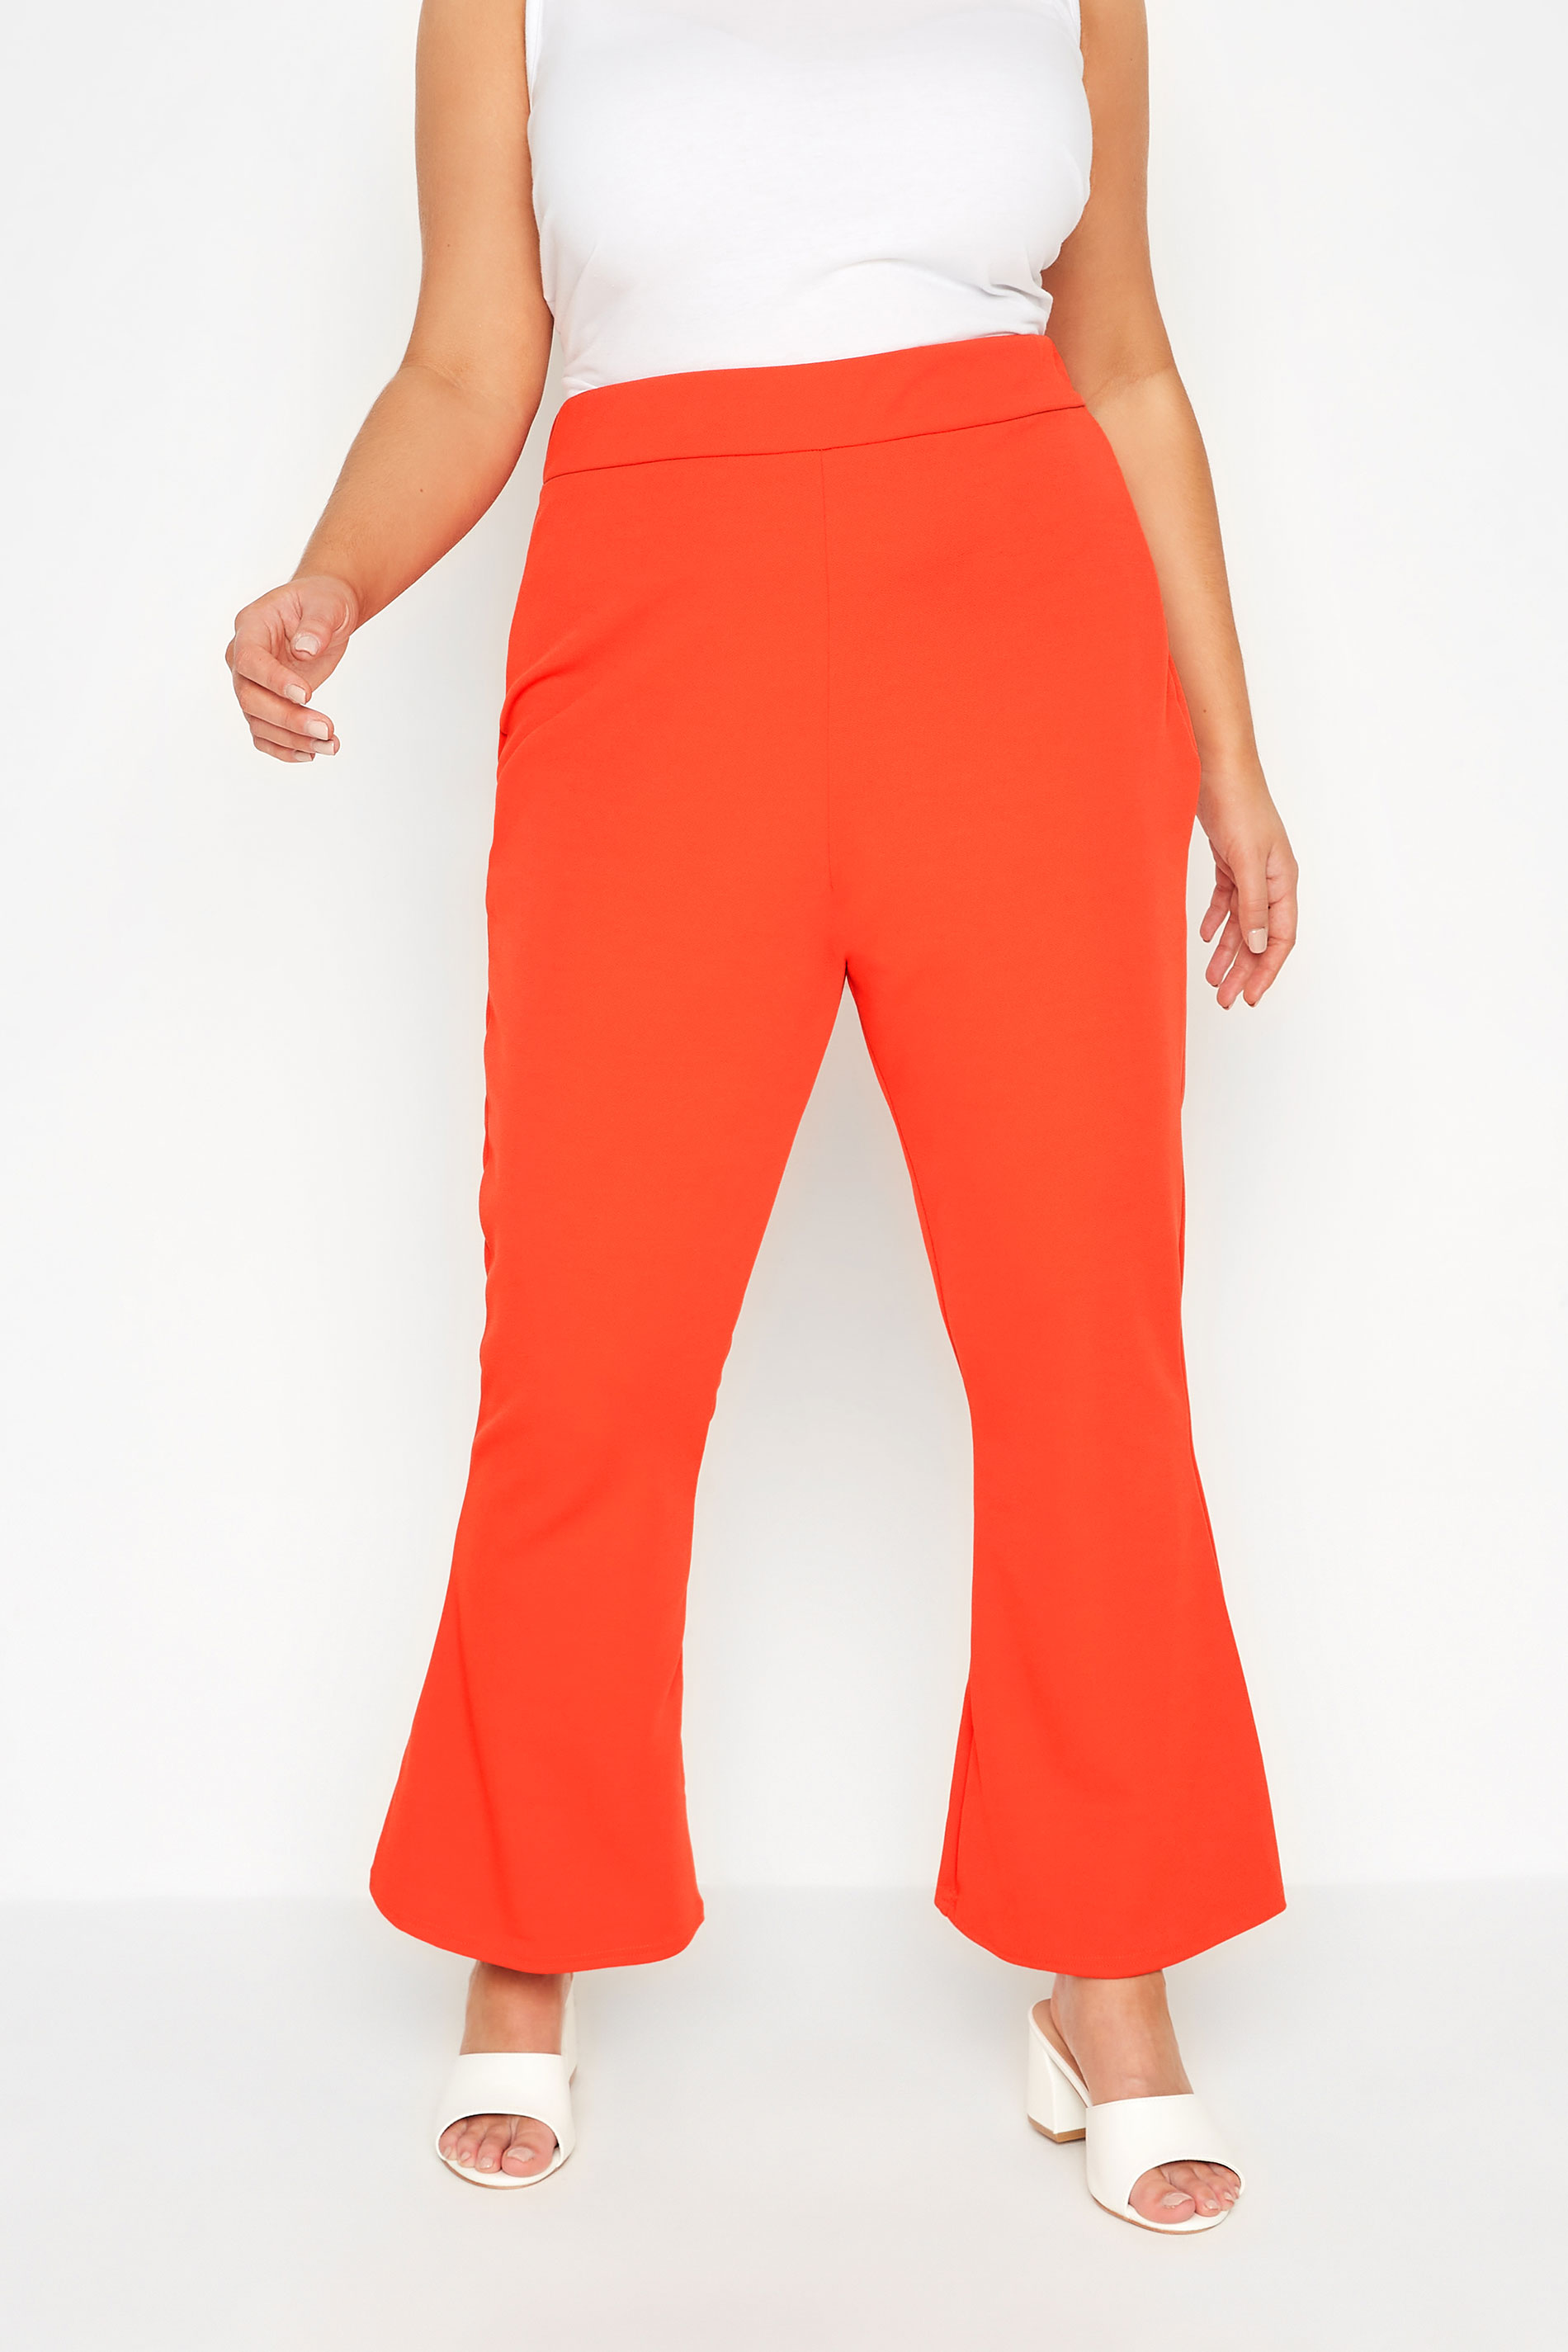 LIMITED COLLECTION Curve Bright Orange Flared Trousers_A.jpg